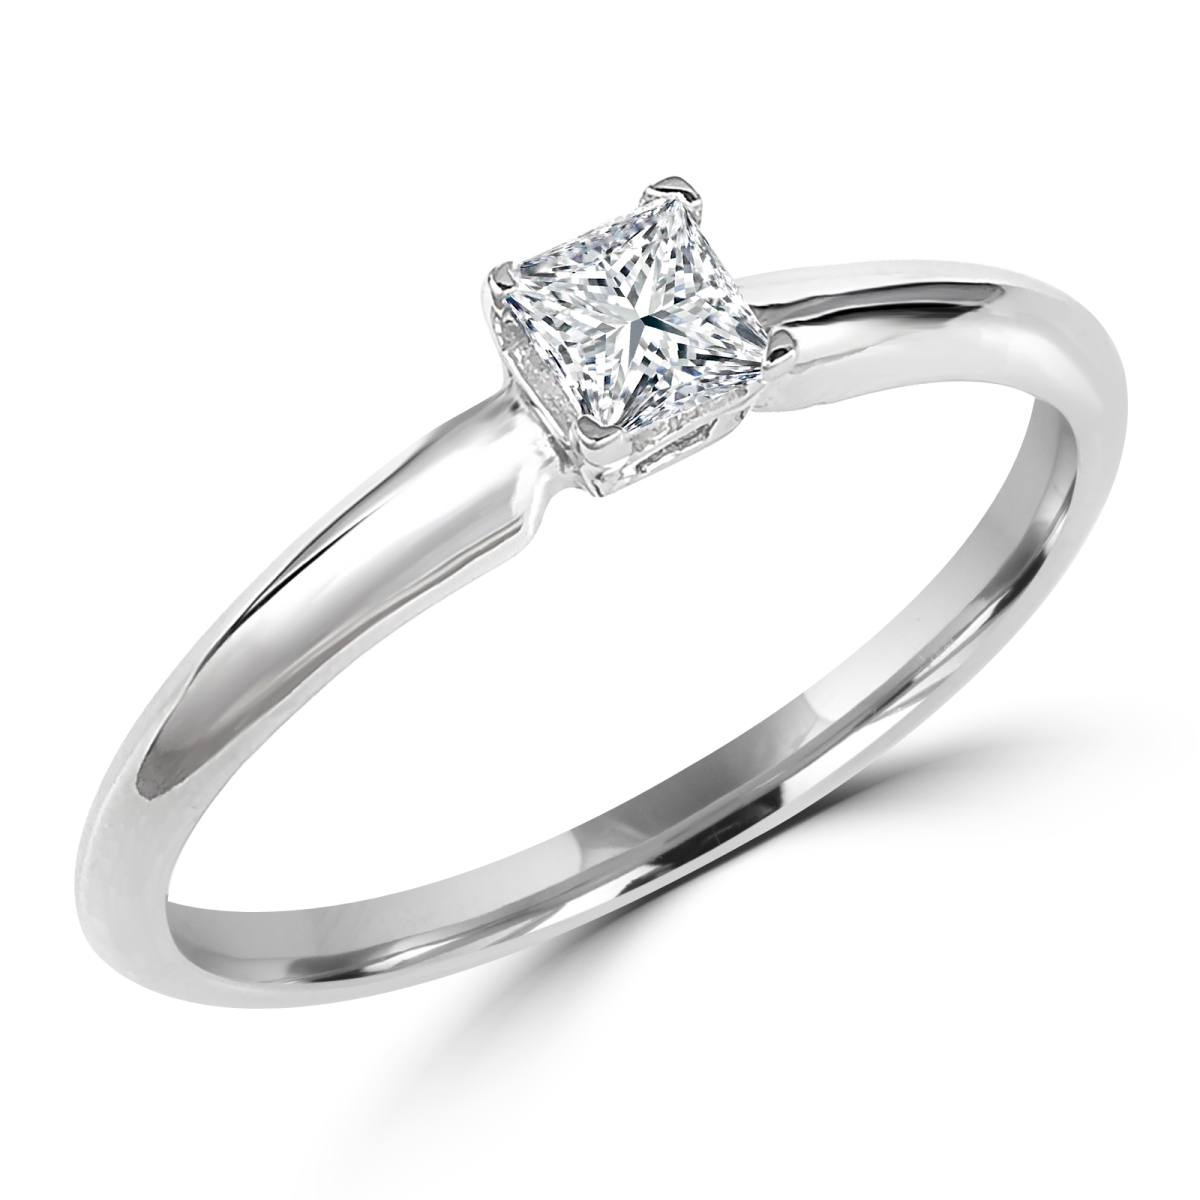 Picture of Majesty Diamonds MD170172-8.5 0.16 CT Princess Diamond Solitaire Engagement Ring in 10K White Gold - 8.5